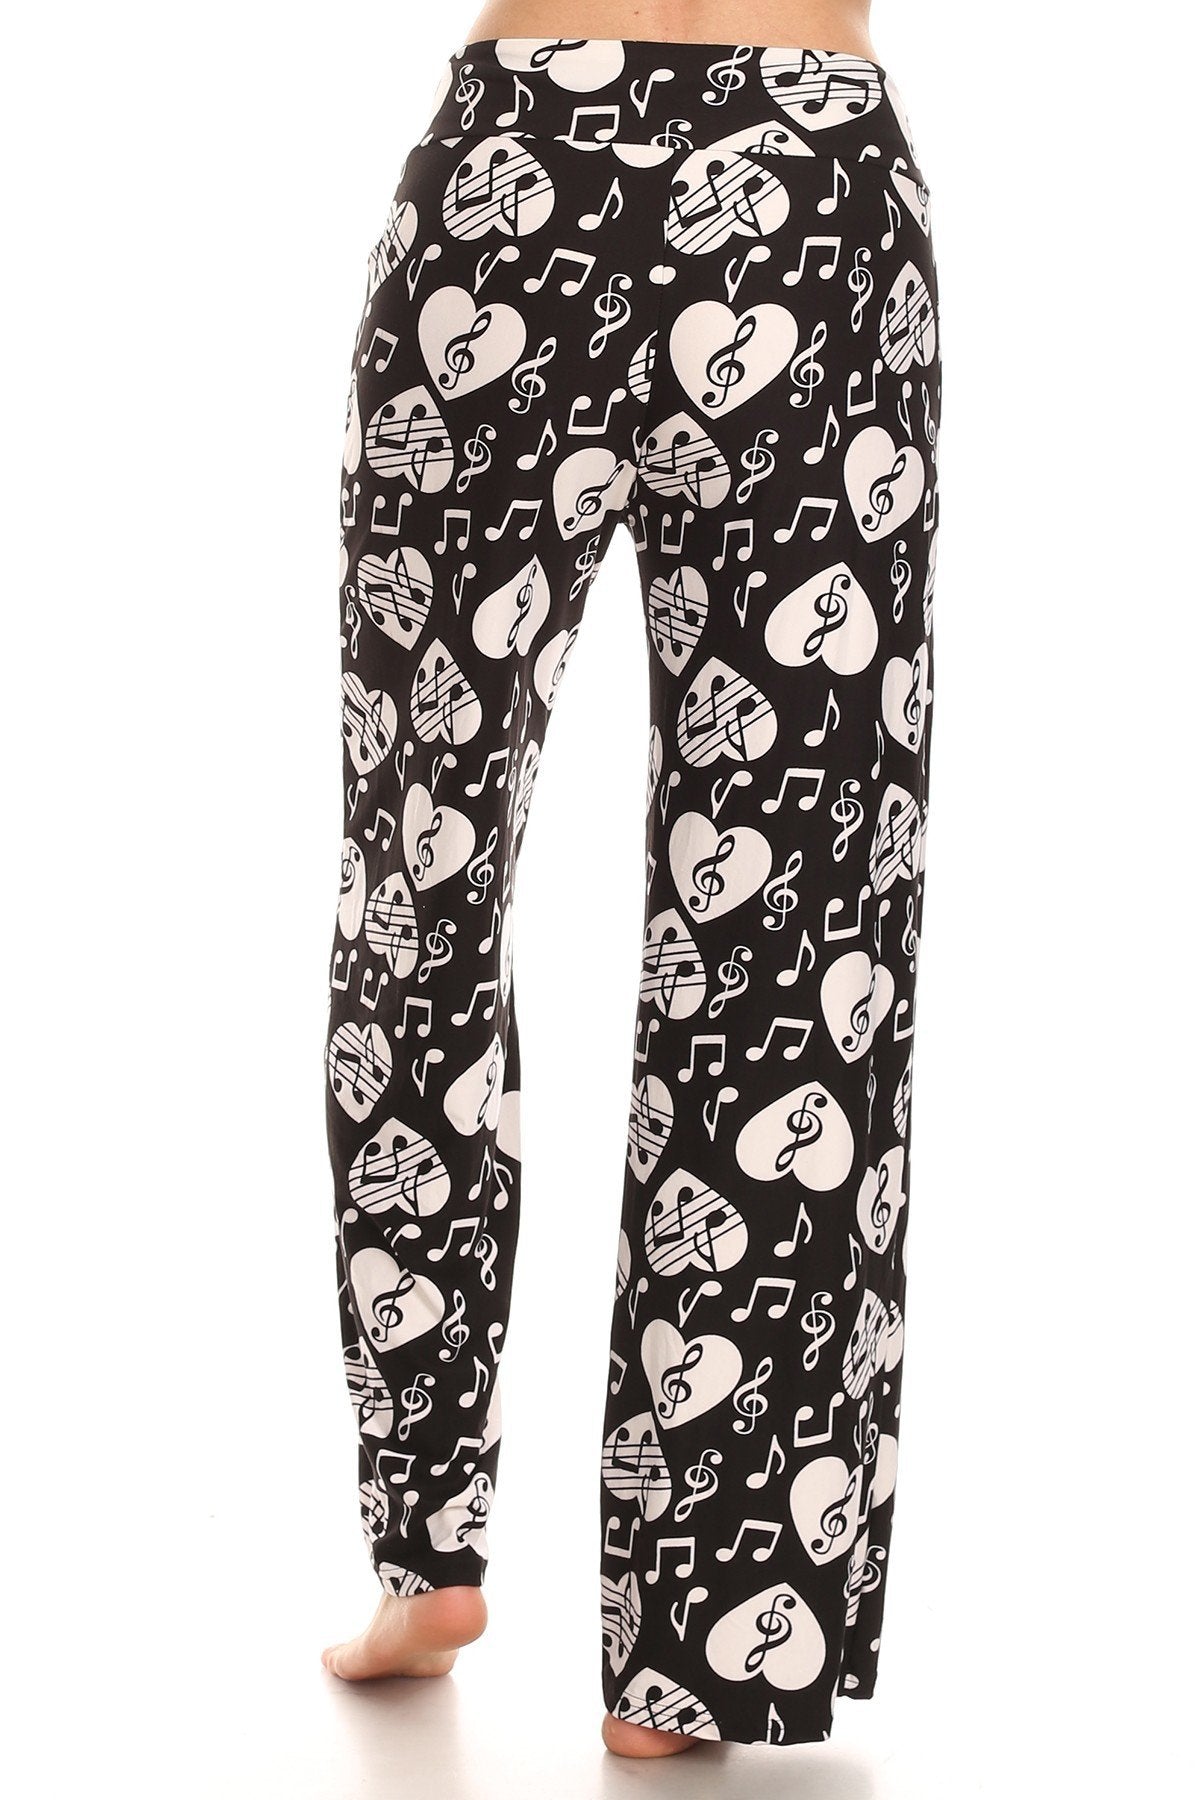 Music Notes Hearts Comfortable Soft Lounge Pajama Pants - SimplyCuteTees